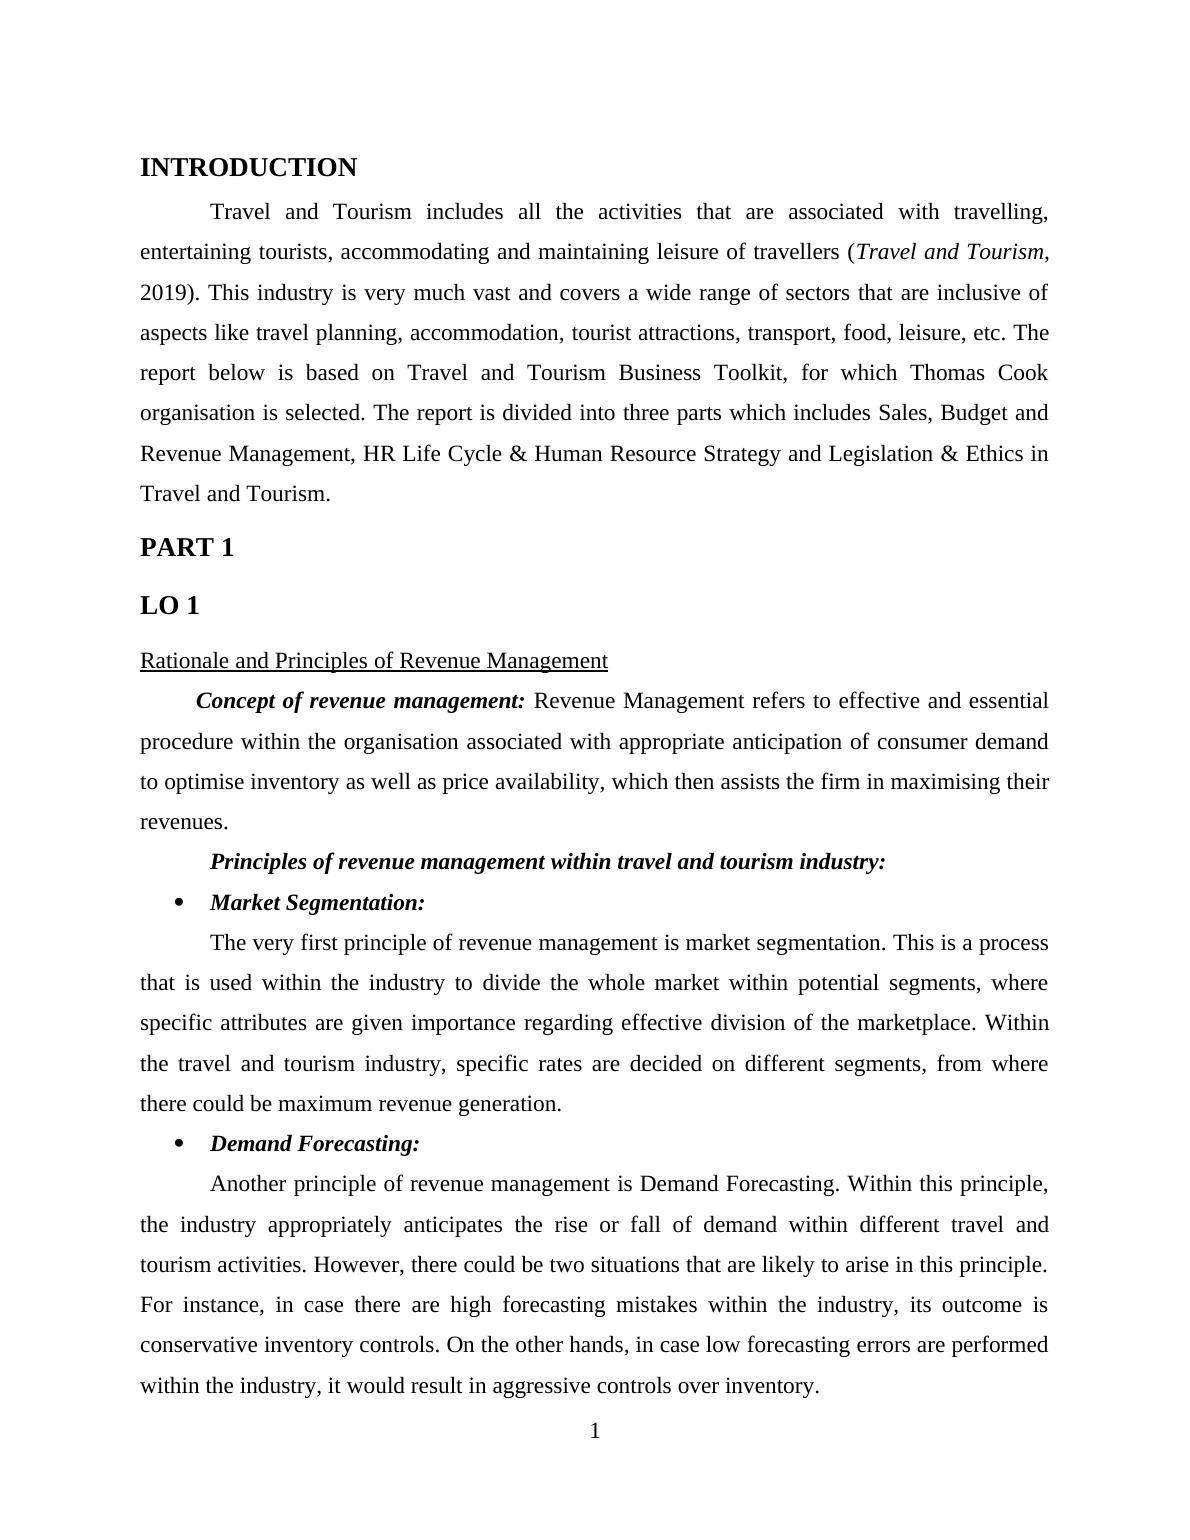 Travel And Tourism Business Toolkit Assignment (Doc)_3